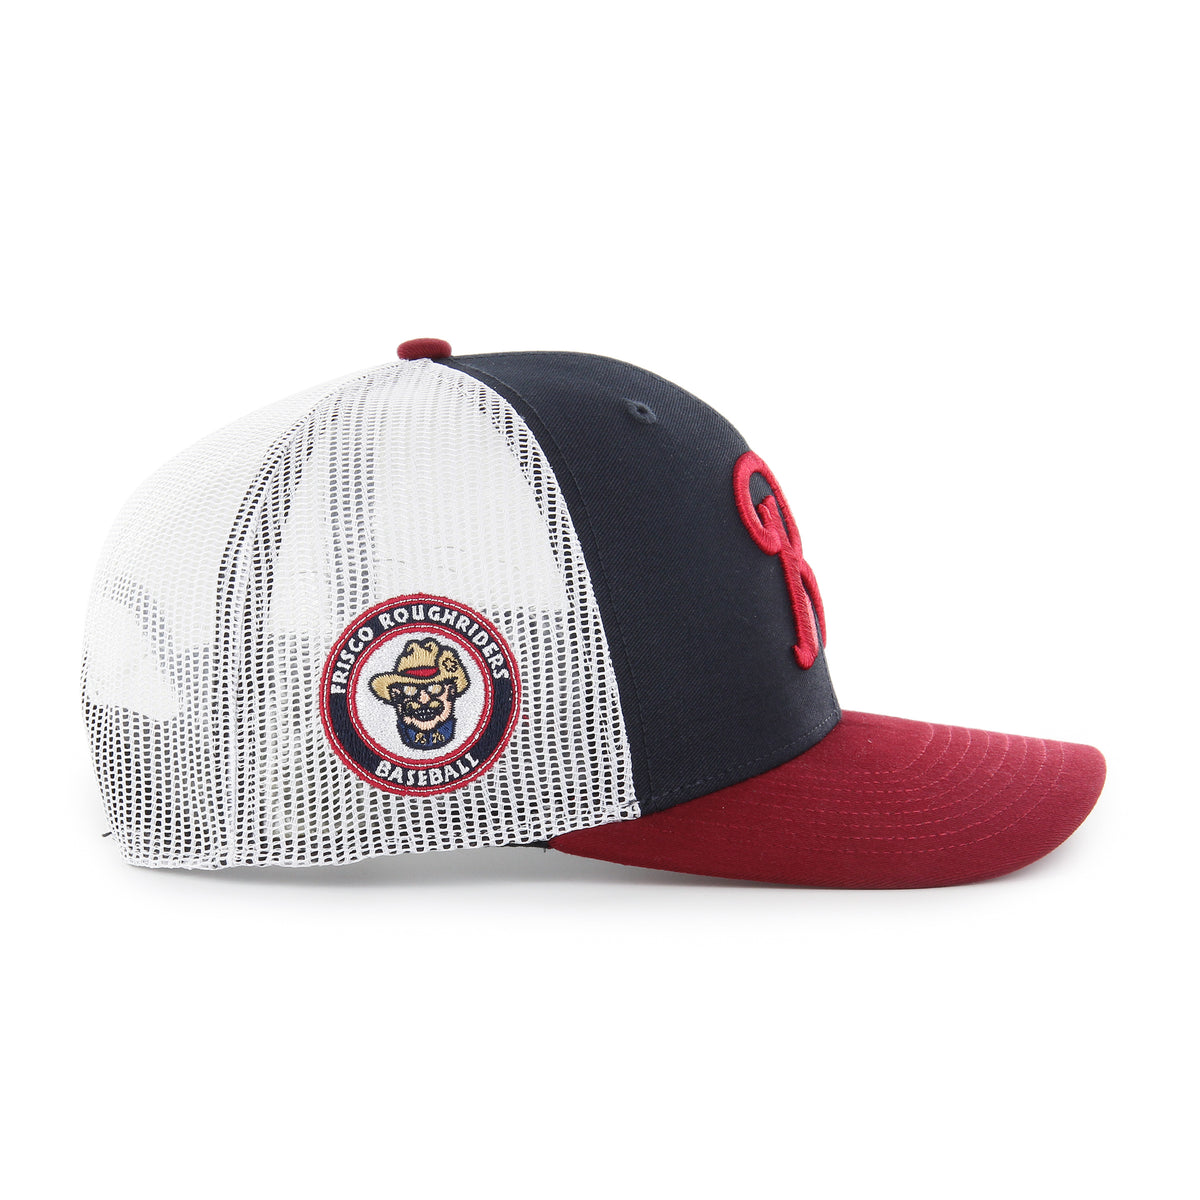 FRISCO ROUGHRIDERS SIDE NOTE '47 TRUCKER